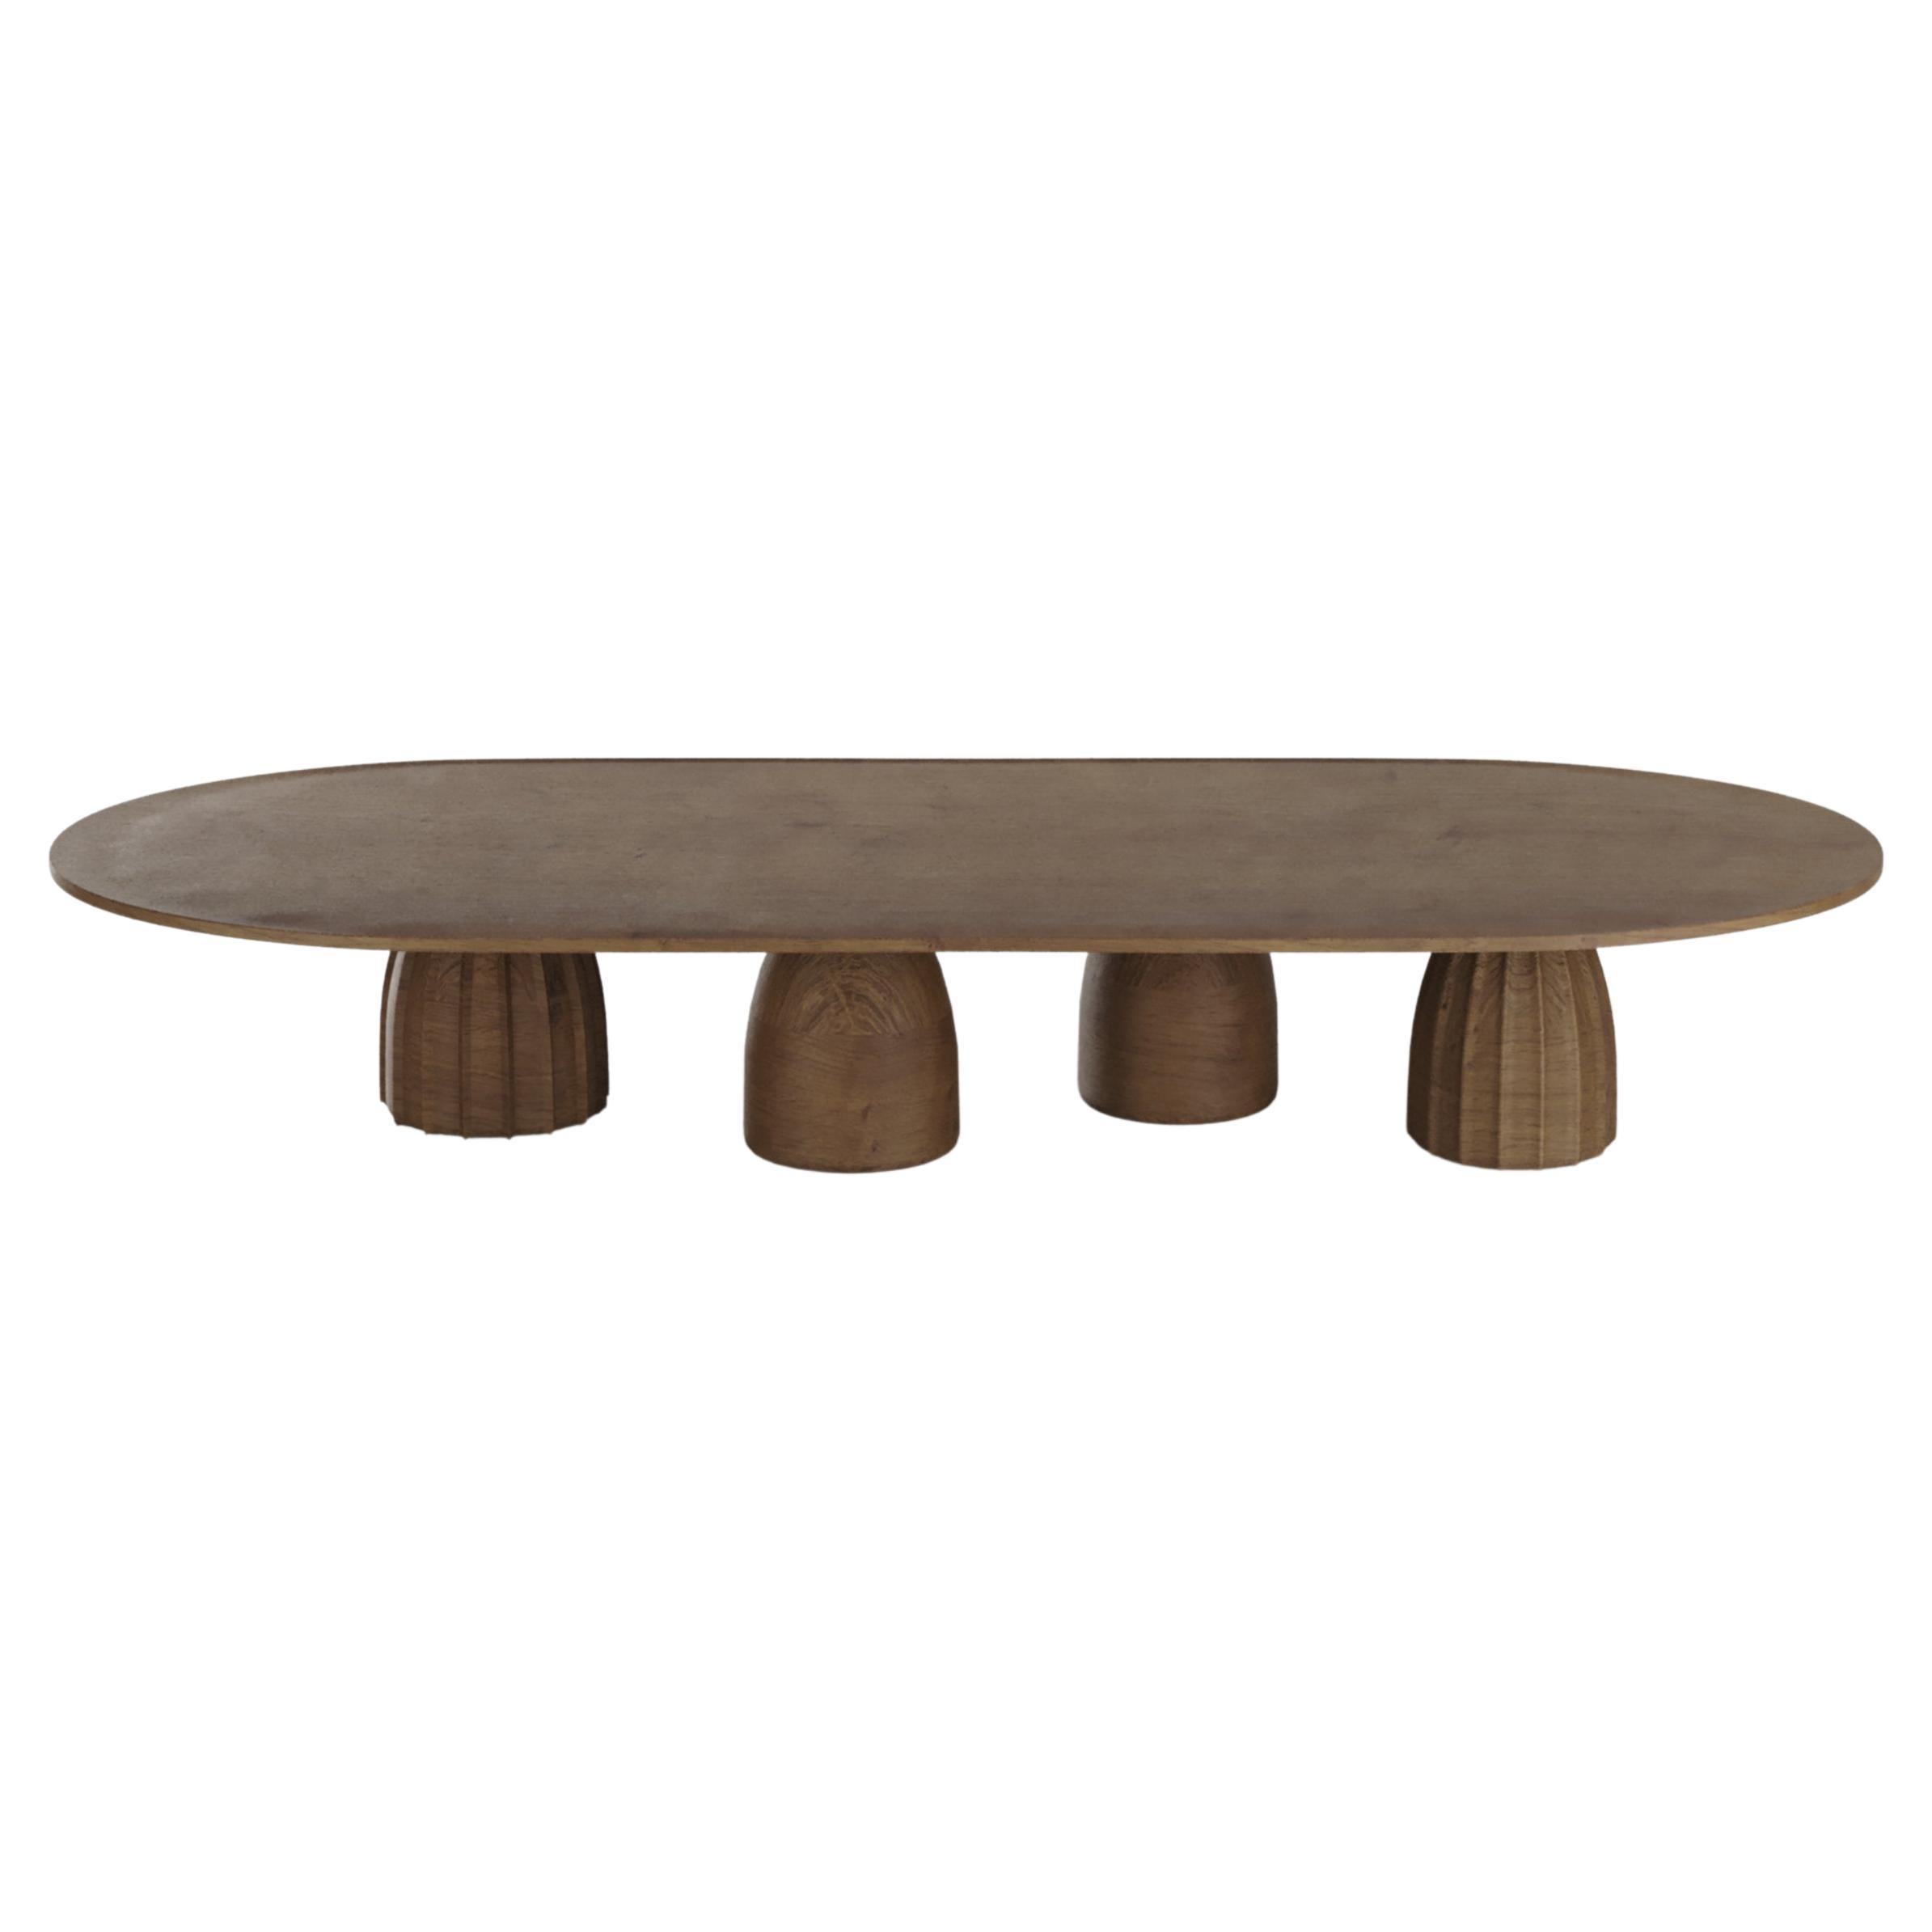 Collector- 21st Century Designed by Alter Ego Djembe Center Table Dark Oak 